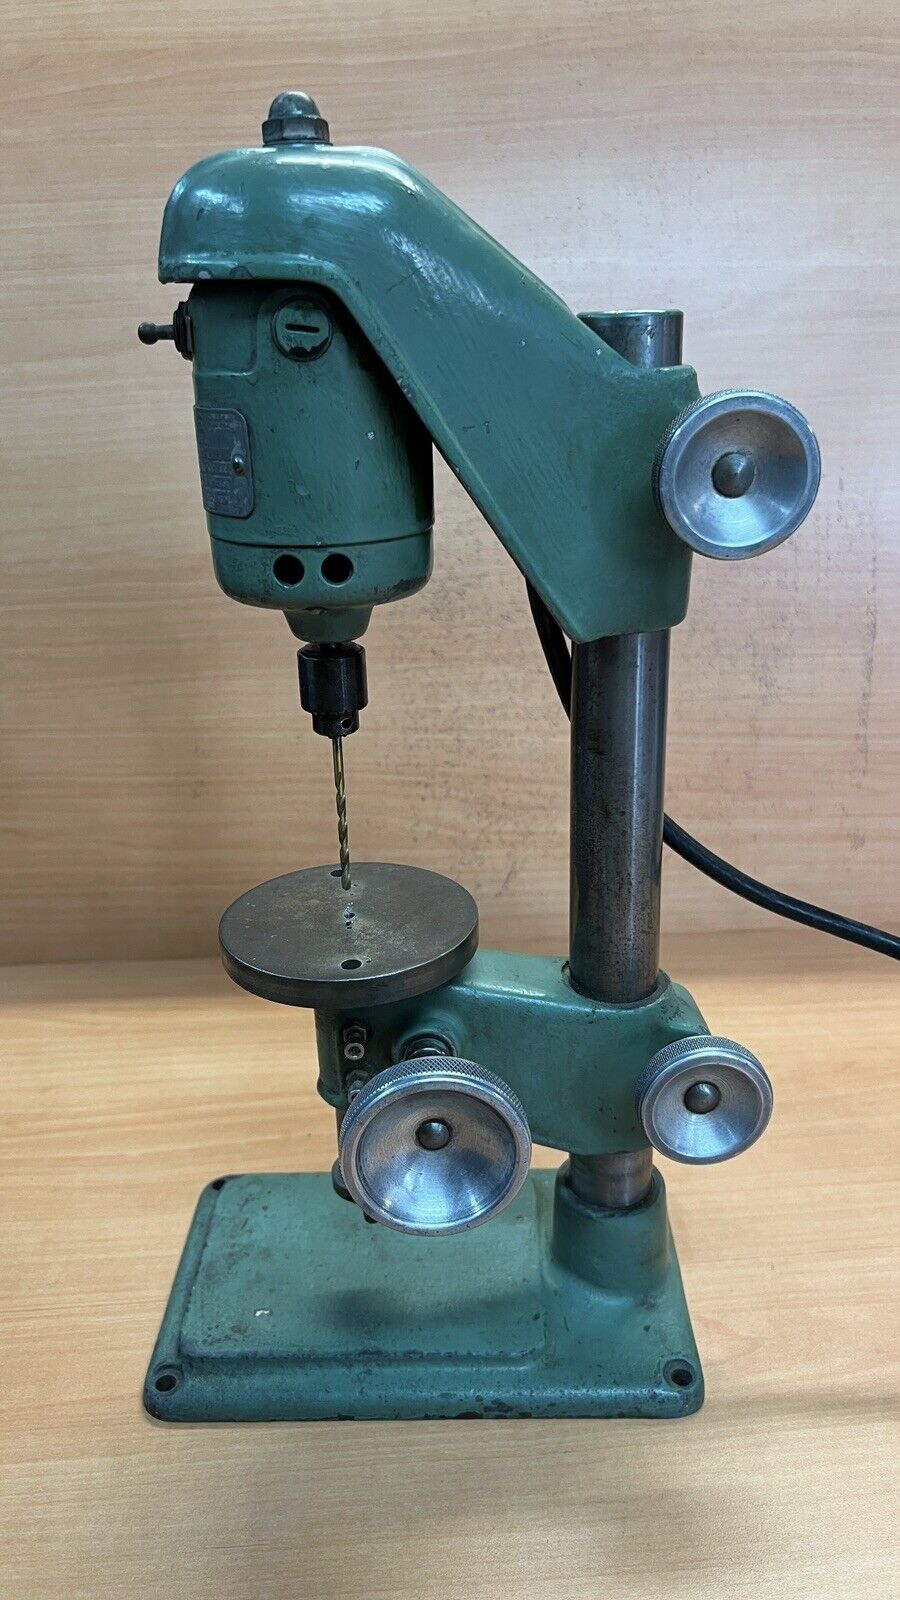 Vintage Dumore Hi Speed Jewelers Drill Press Watchmaker made in USA